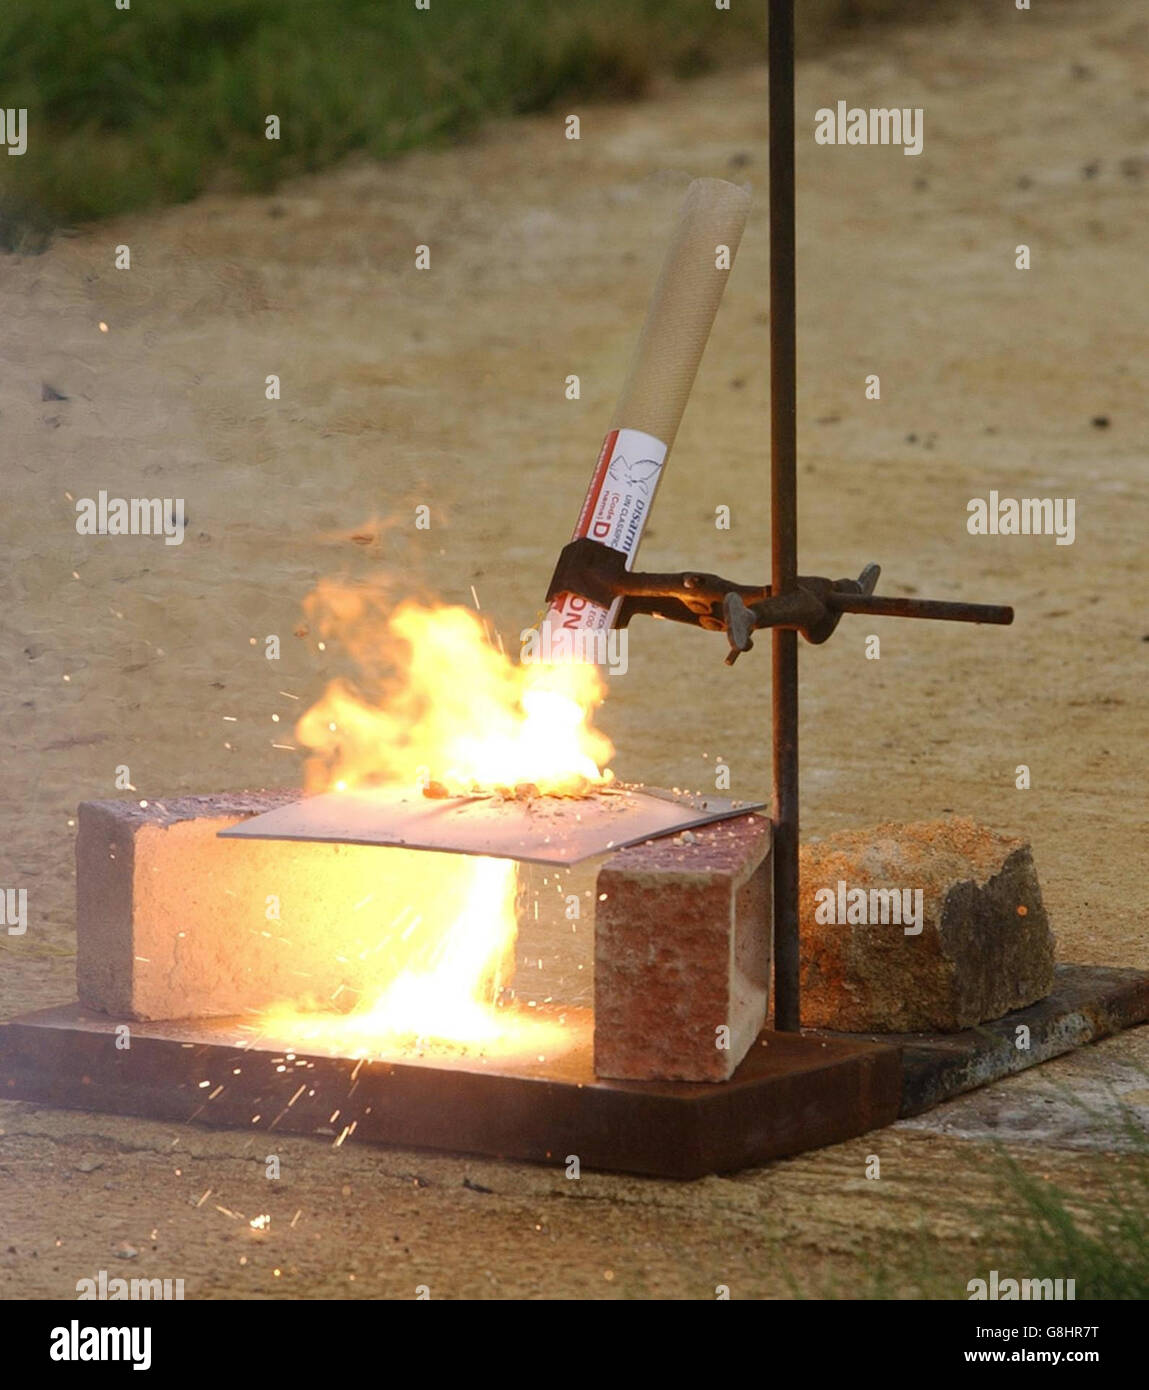 A 'Dragon' burns through a piece of steel plate during a demonstration. A simple new method for clearing landmines without using dangerous and potentially lethal explosives was unveiled today by a team of British scientists from Cranfield University, in Oxfordshire. The 'dragon' device 'burns out' rather than explodes landmines, which is the method currently favoured by the UN. Stock Photo